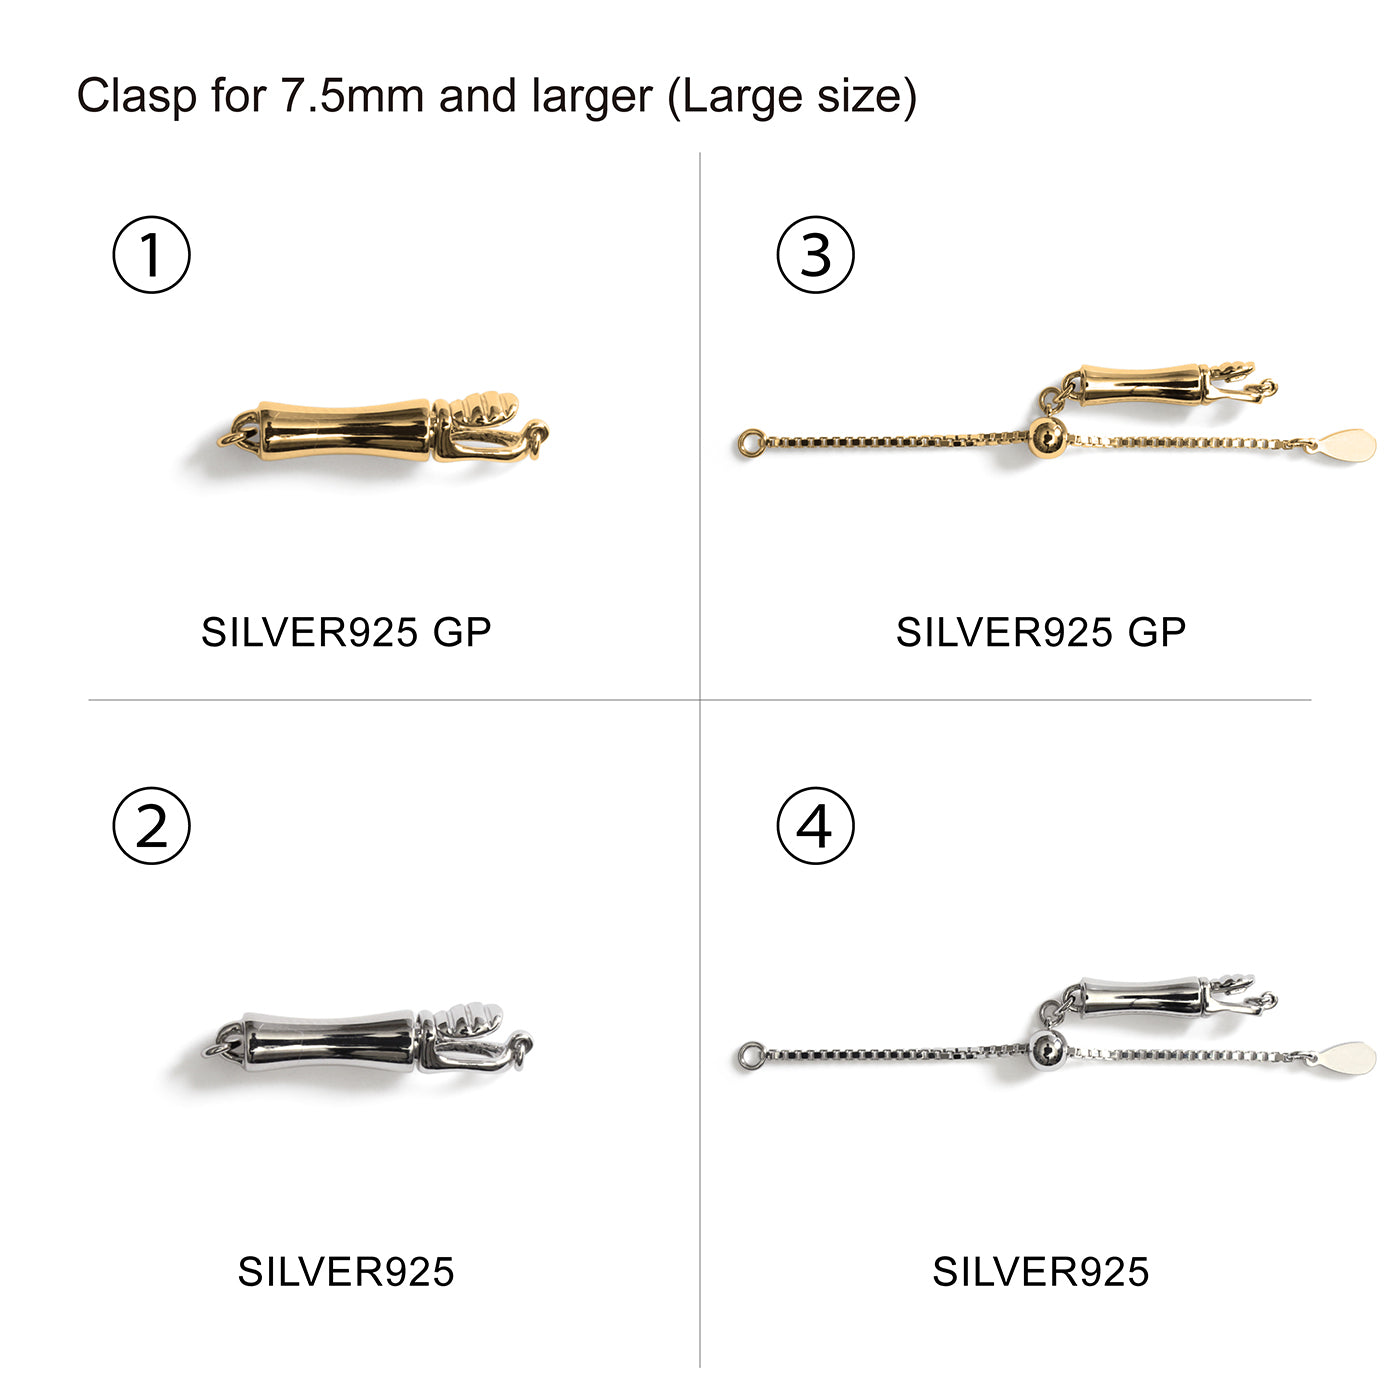 About Clasp Attachment Processing